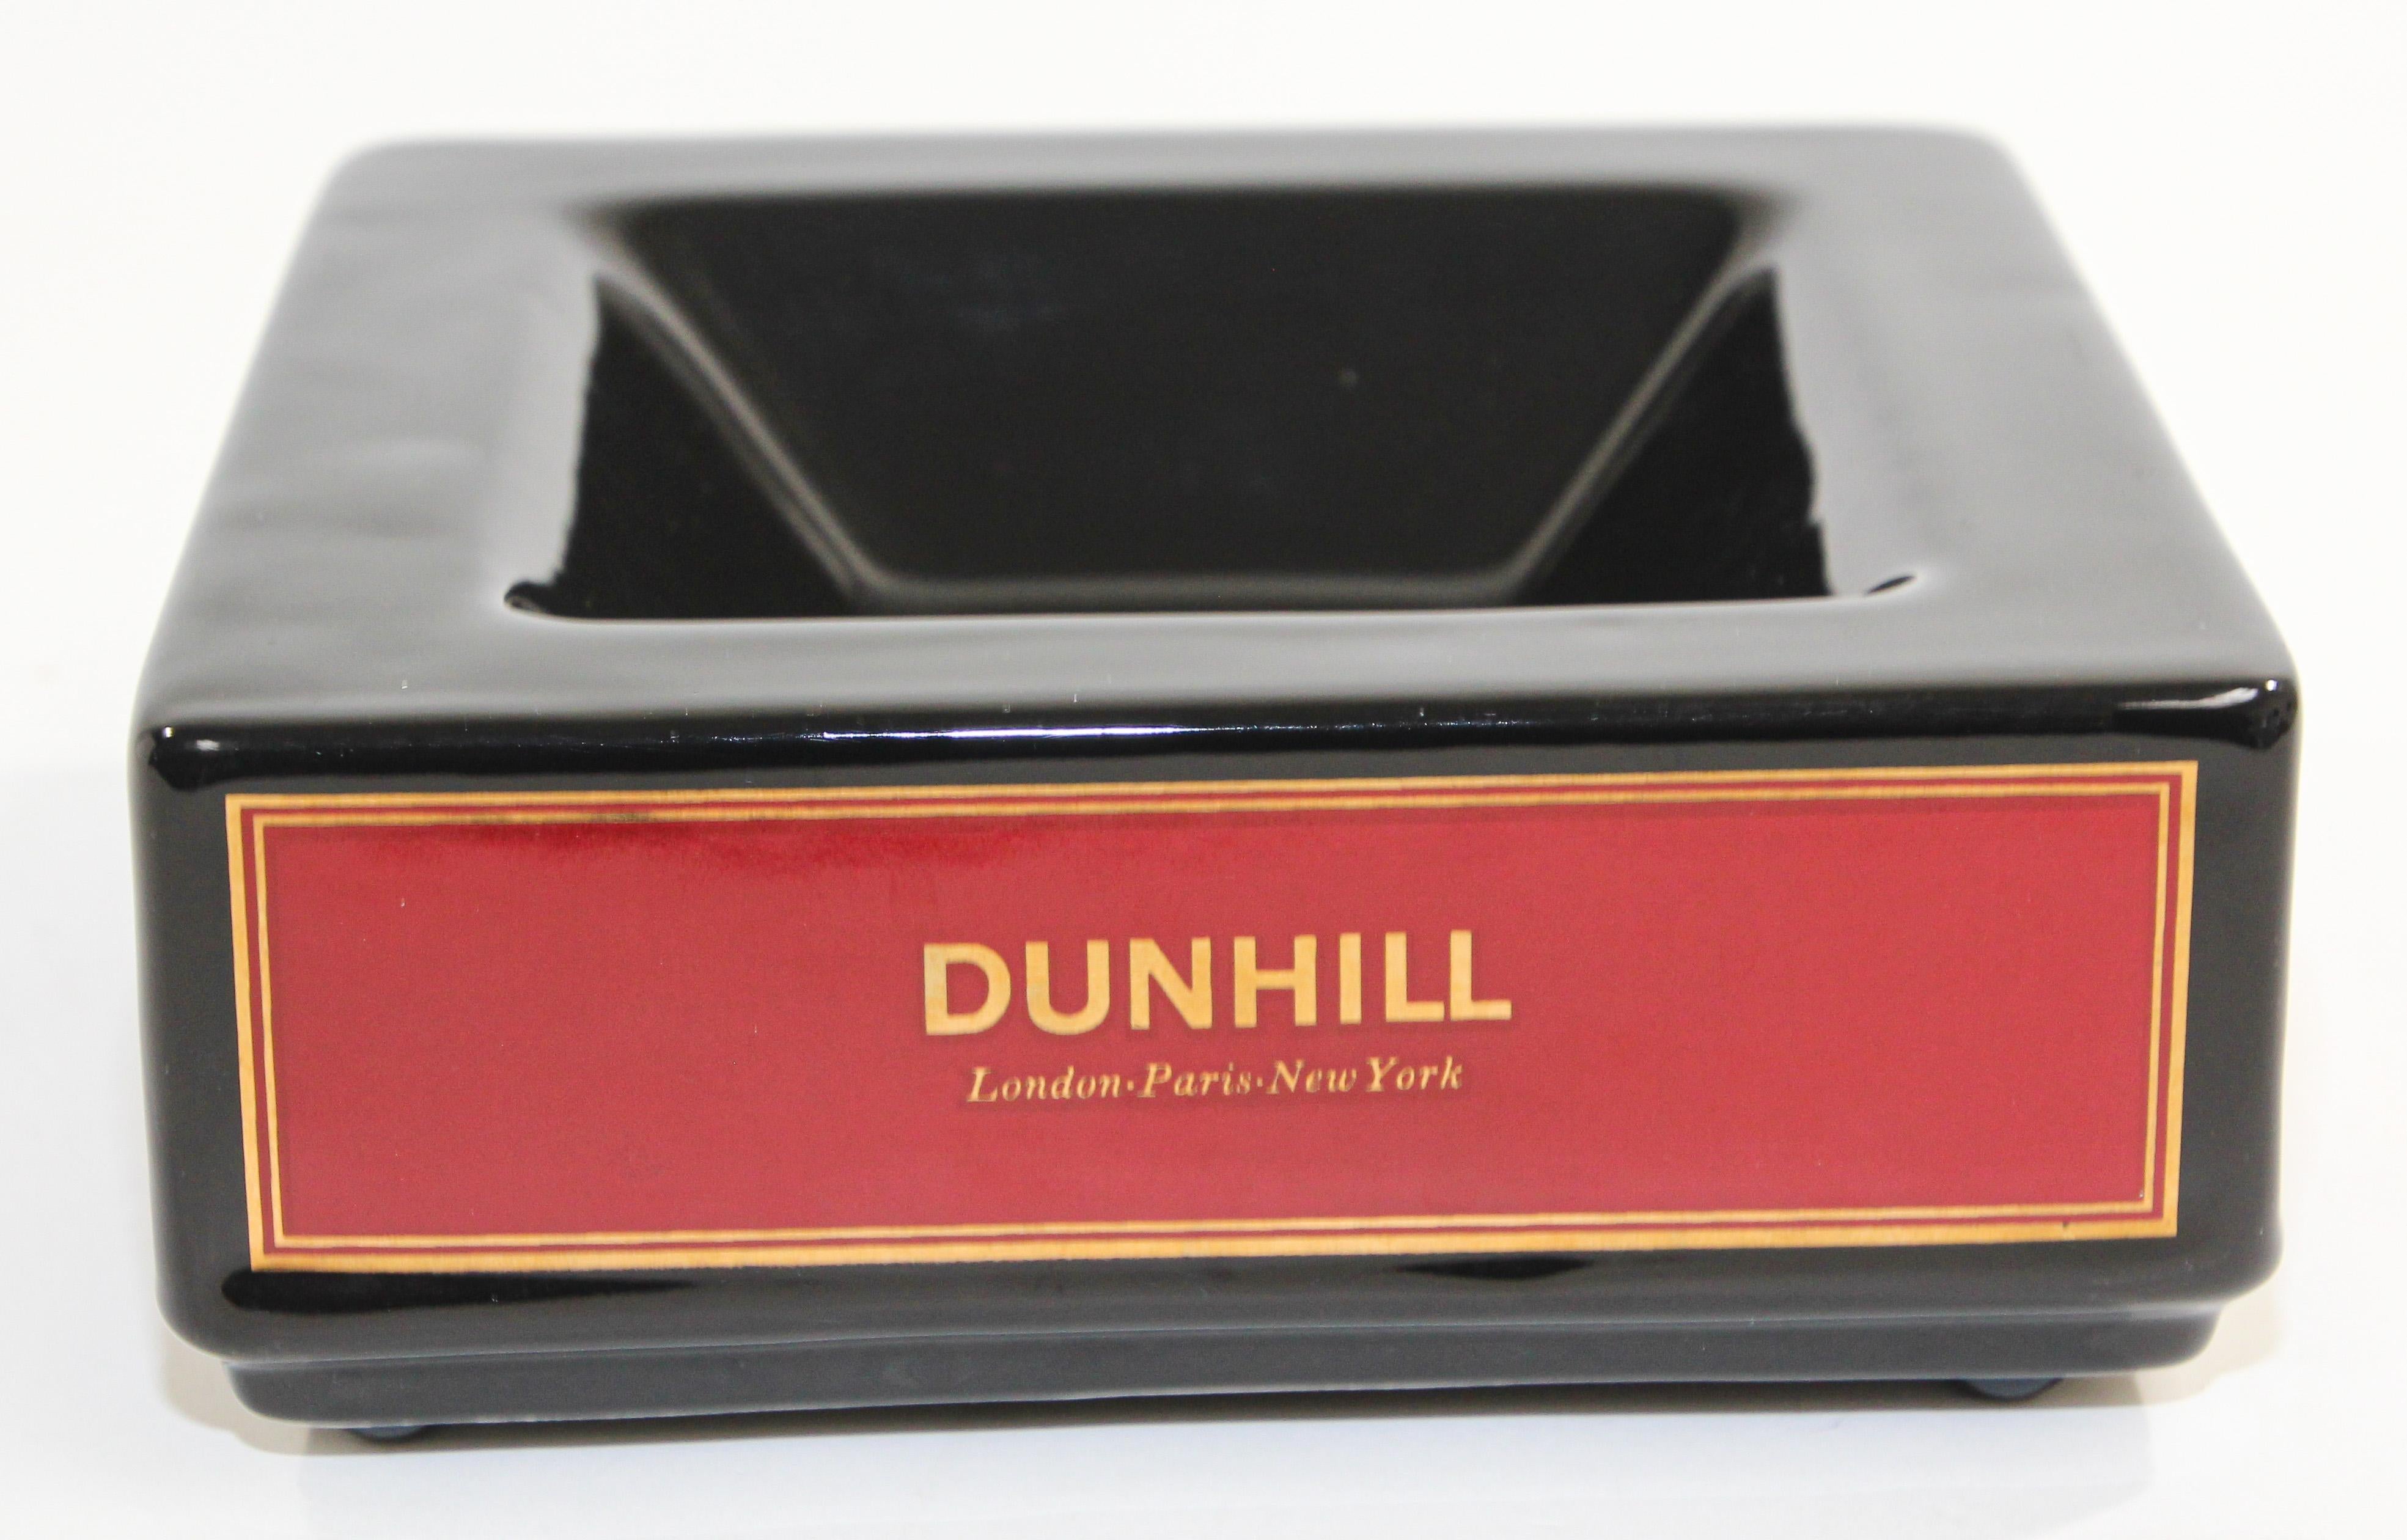 Vintage Dunhil Cigar Ashtray England Black and Red, Collectible 2